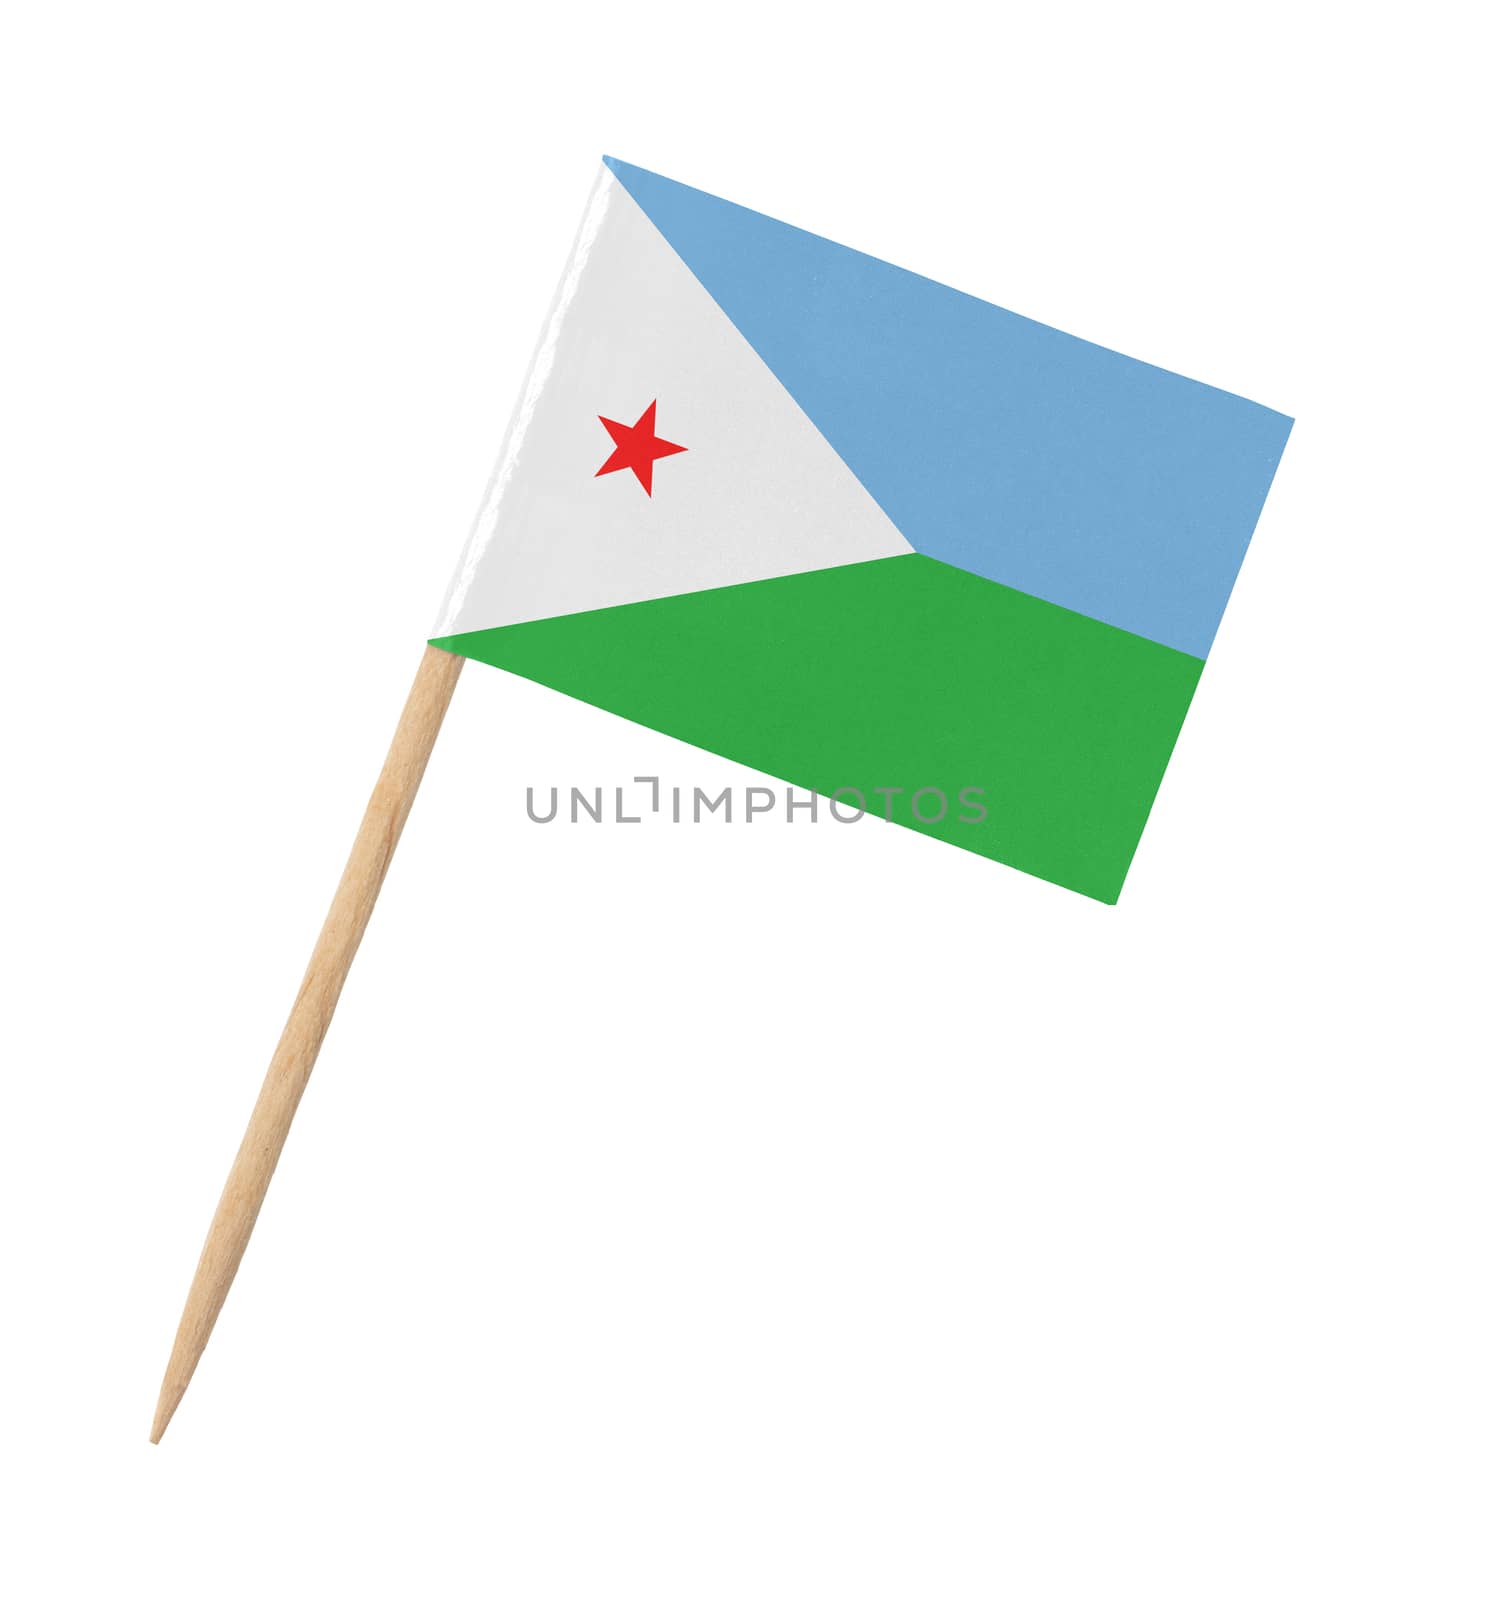 Small paper flag of Djibouti on wooden stick by michaklootwijk